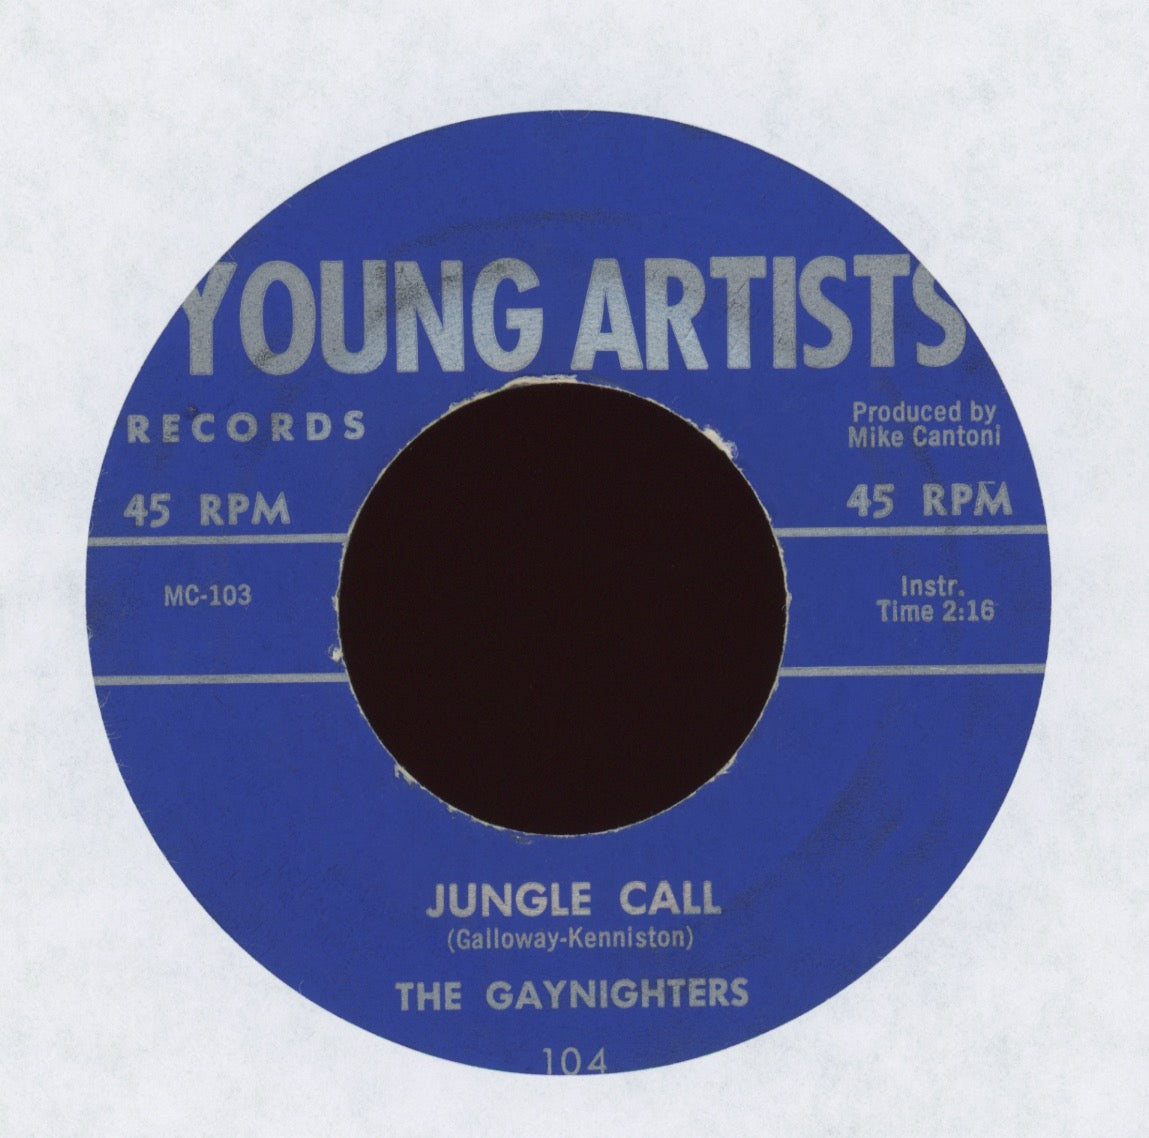 The Gaynighters - Jungle Call on Young Artists